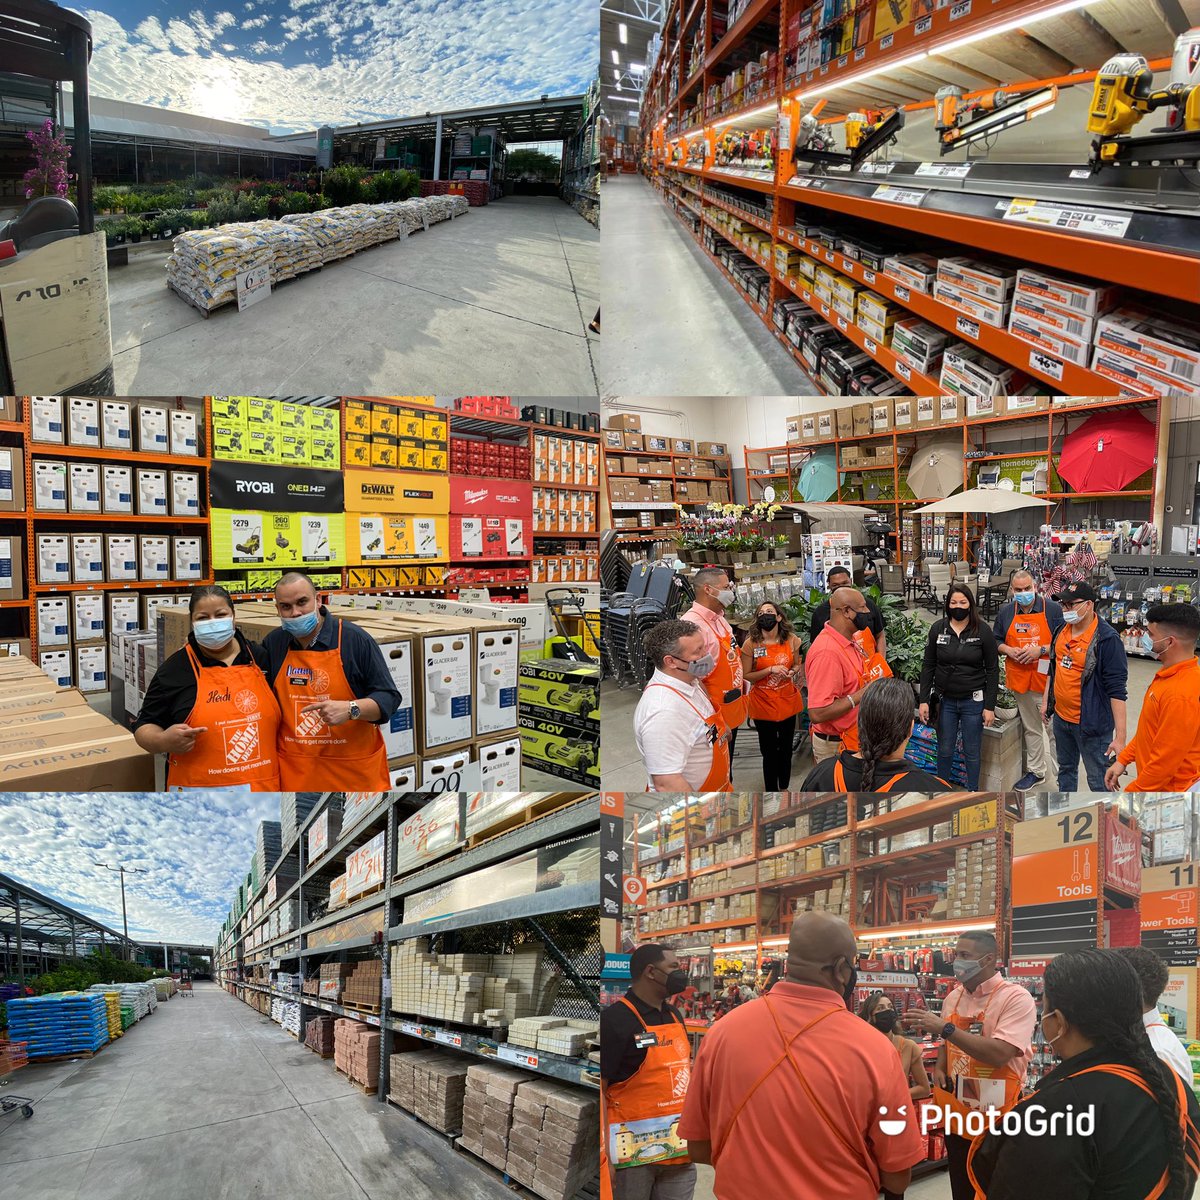 Phenomenal walk with @THD_HXT @CalvinM51489250 Thank you for visiting 0202 Hialeah and spending time with our Fantastic Associates @wcork19 @JerryRamasami @JuanLop22711873 @Wilma36933199 #Latepost